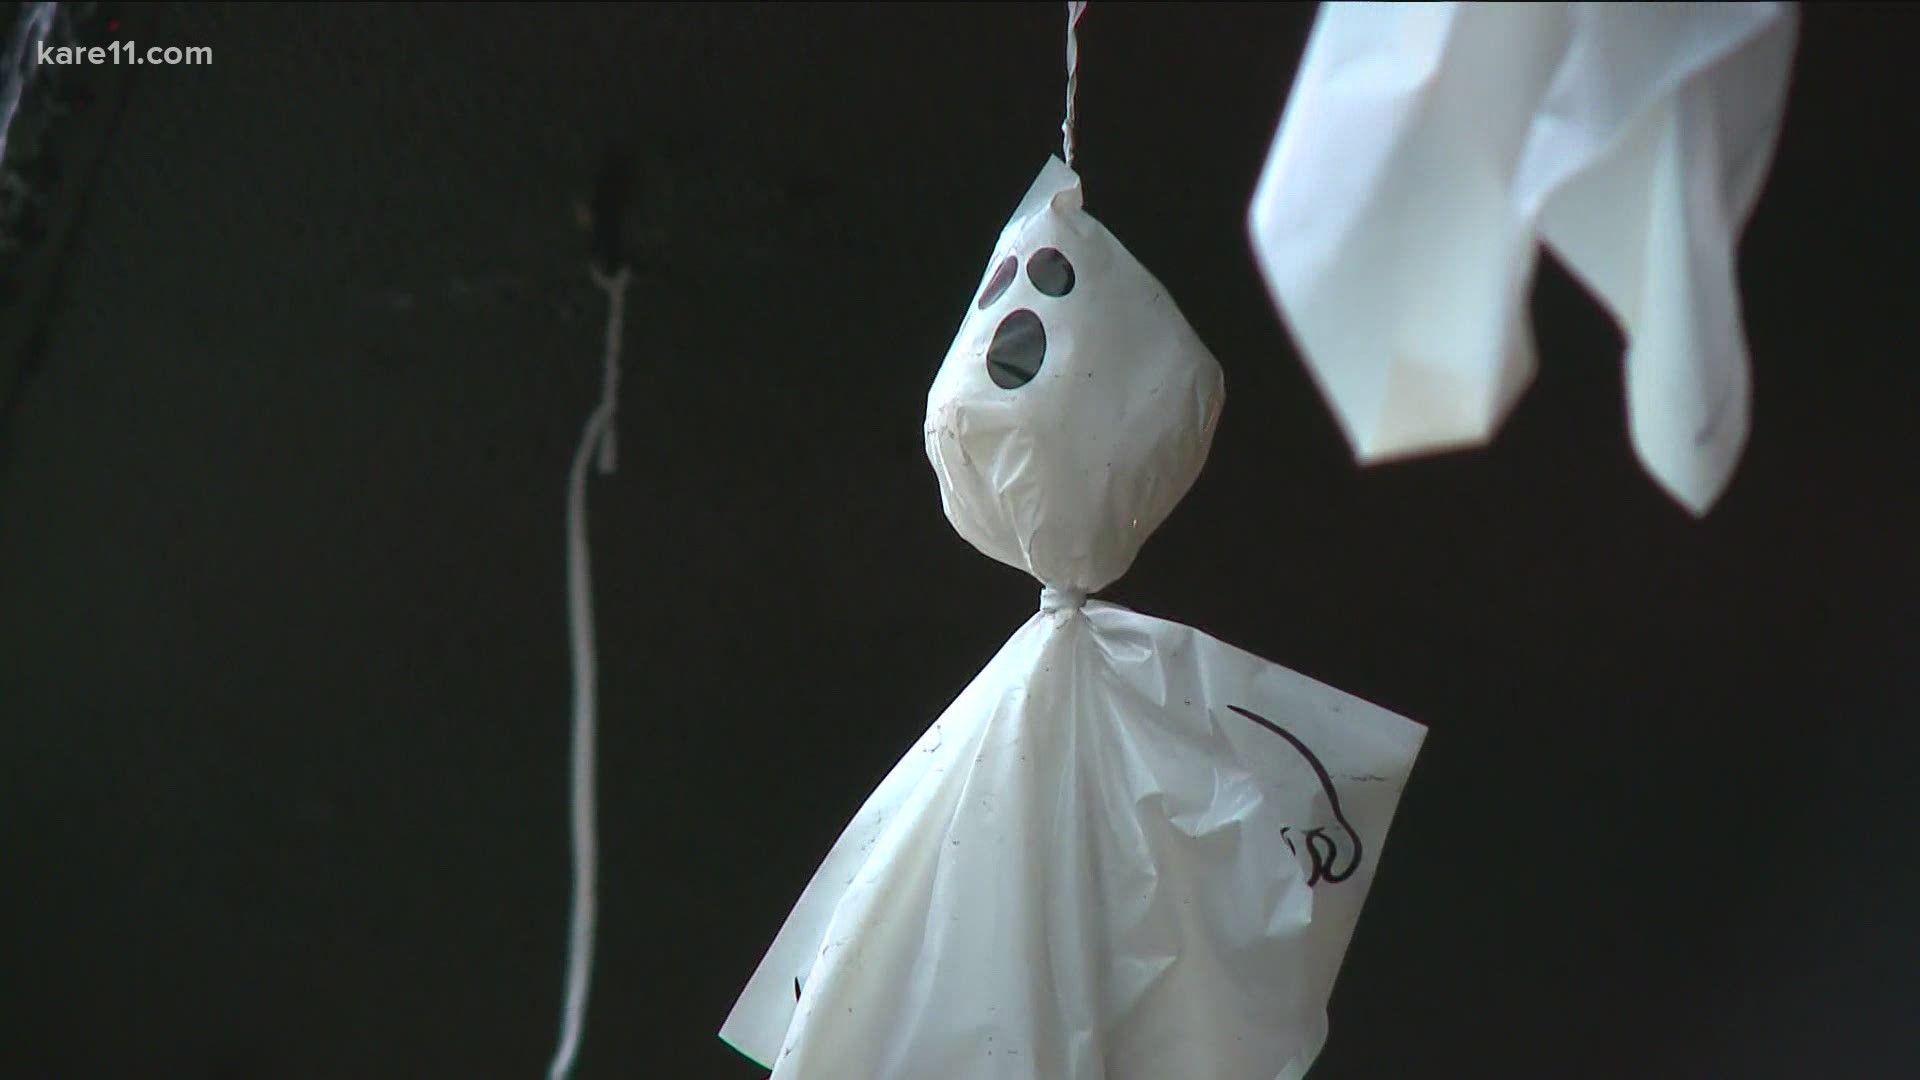 Volunteers with Anoka Halloween are still working their magic ensure it won't be a complete ghost town on Halloween.